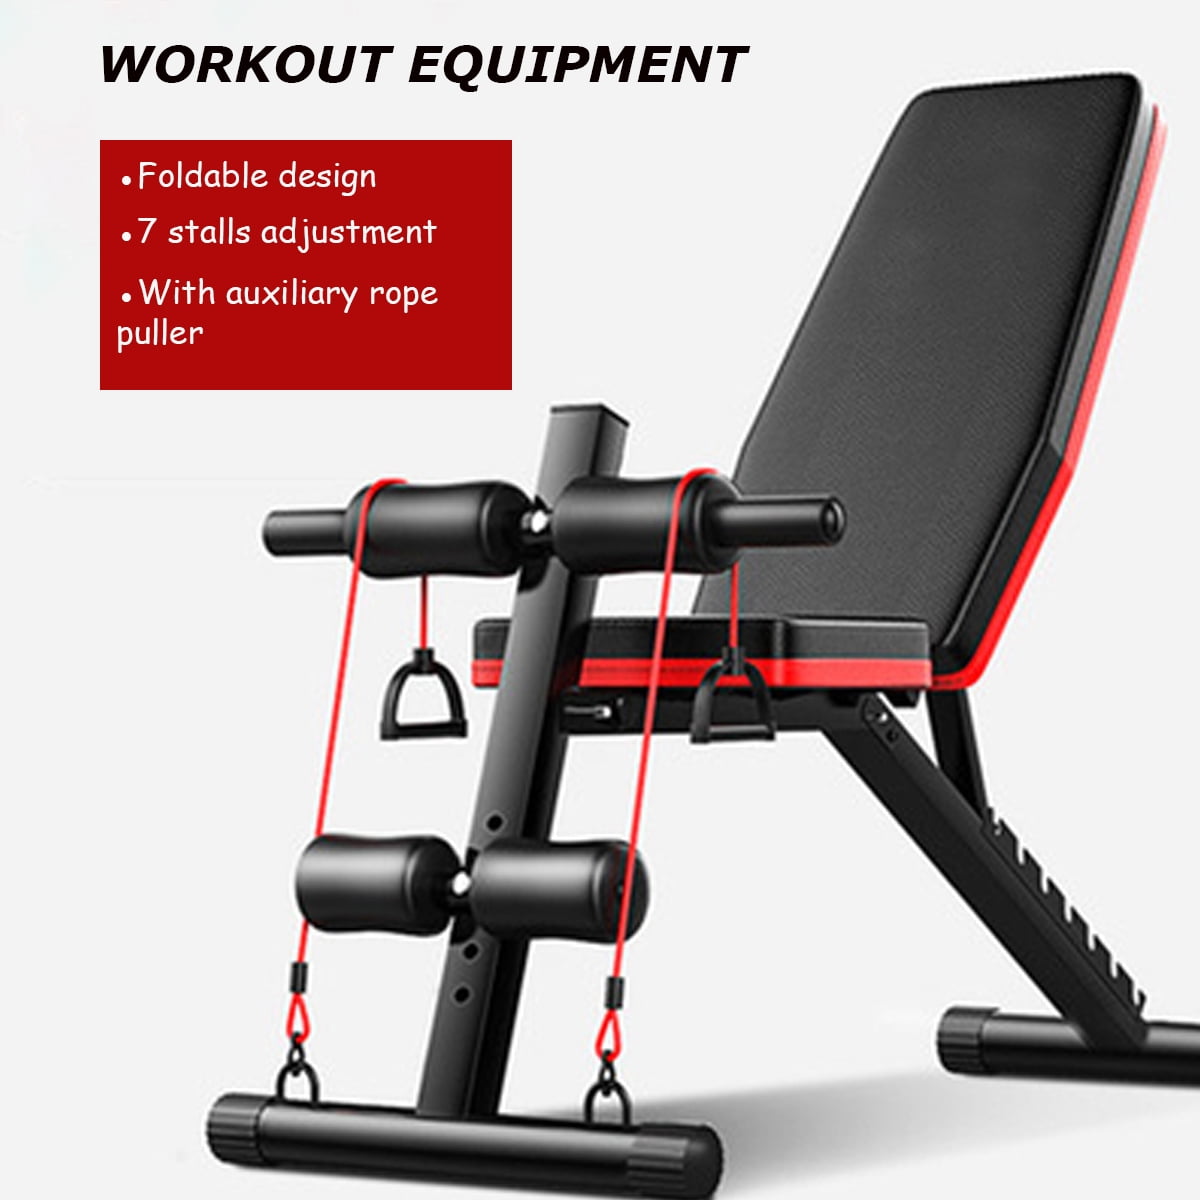 UMAY New Version 2021 Adjustable Weight Bench Fast Folding Incline Decline & Multi-purpose Utility Bench for Full Body Workout Strength Training 